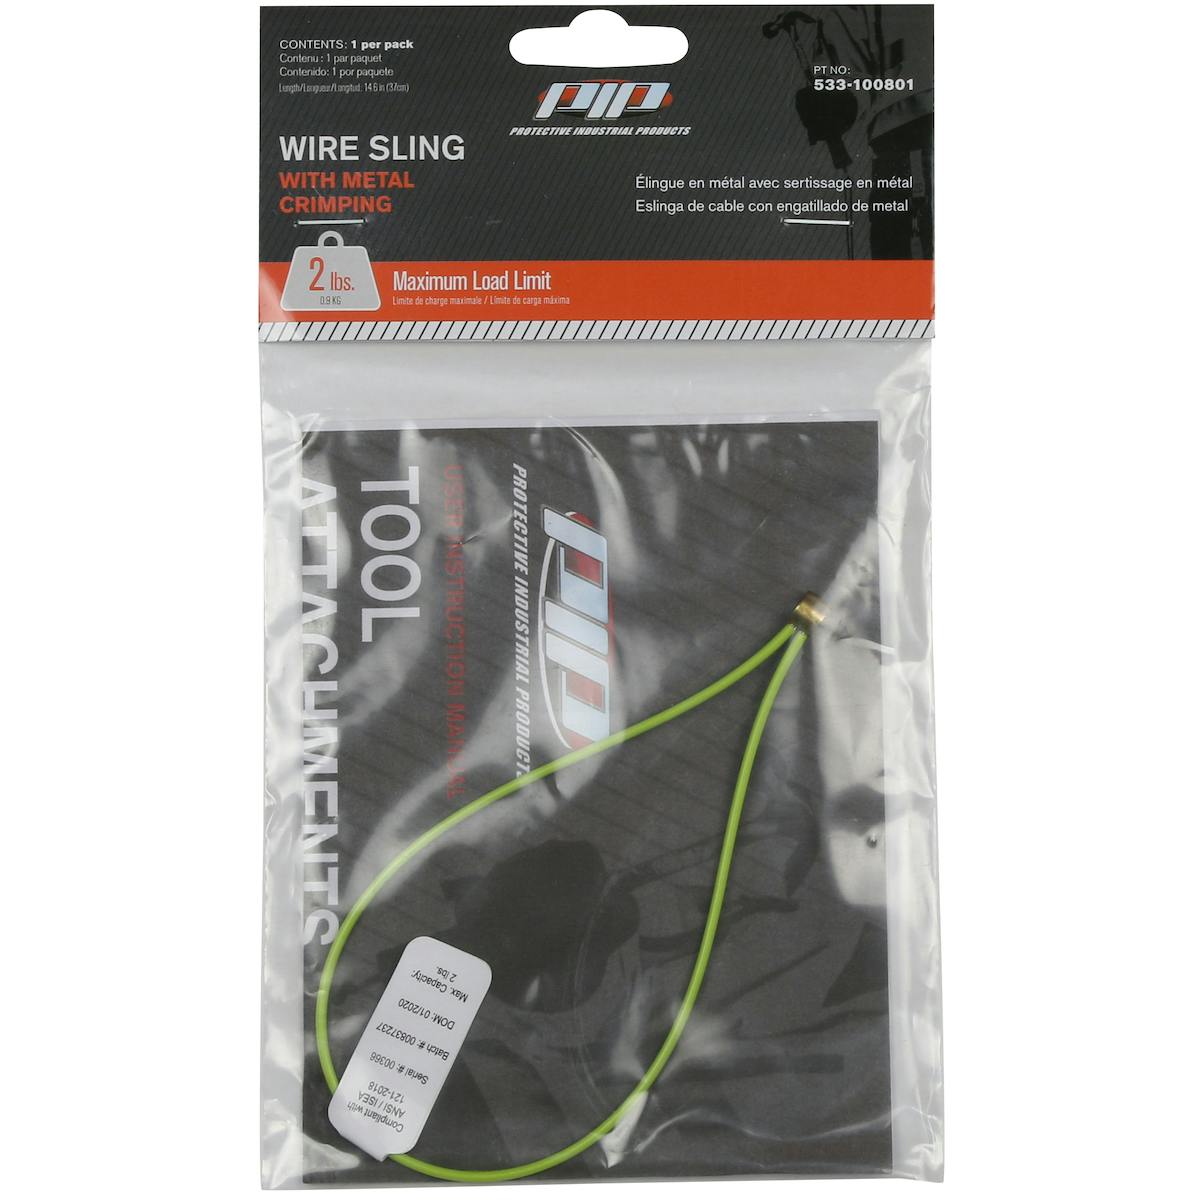 Wire Sling Loop - 2 lbs. maximum load limit - Retail Packaged, Red (533-100801) - OS